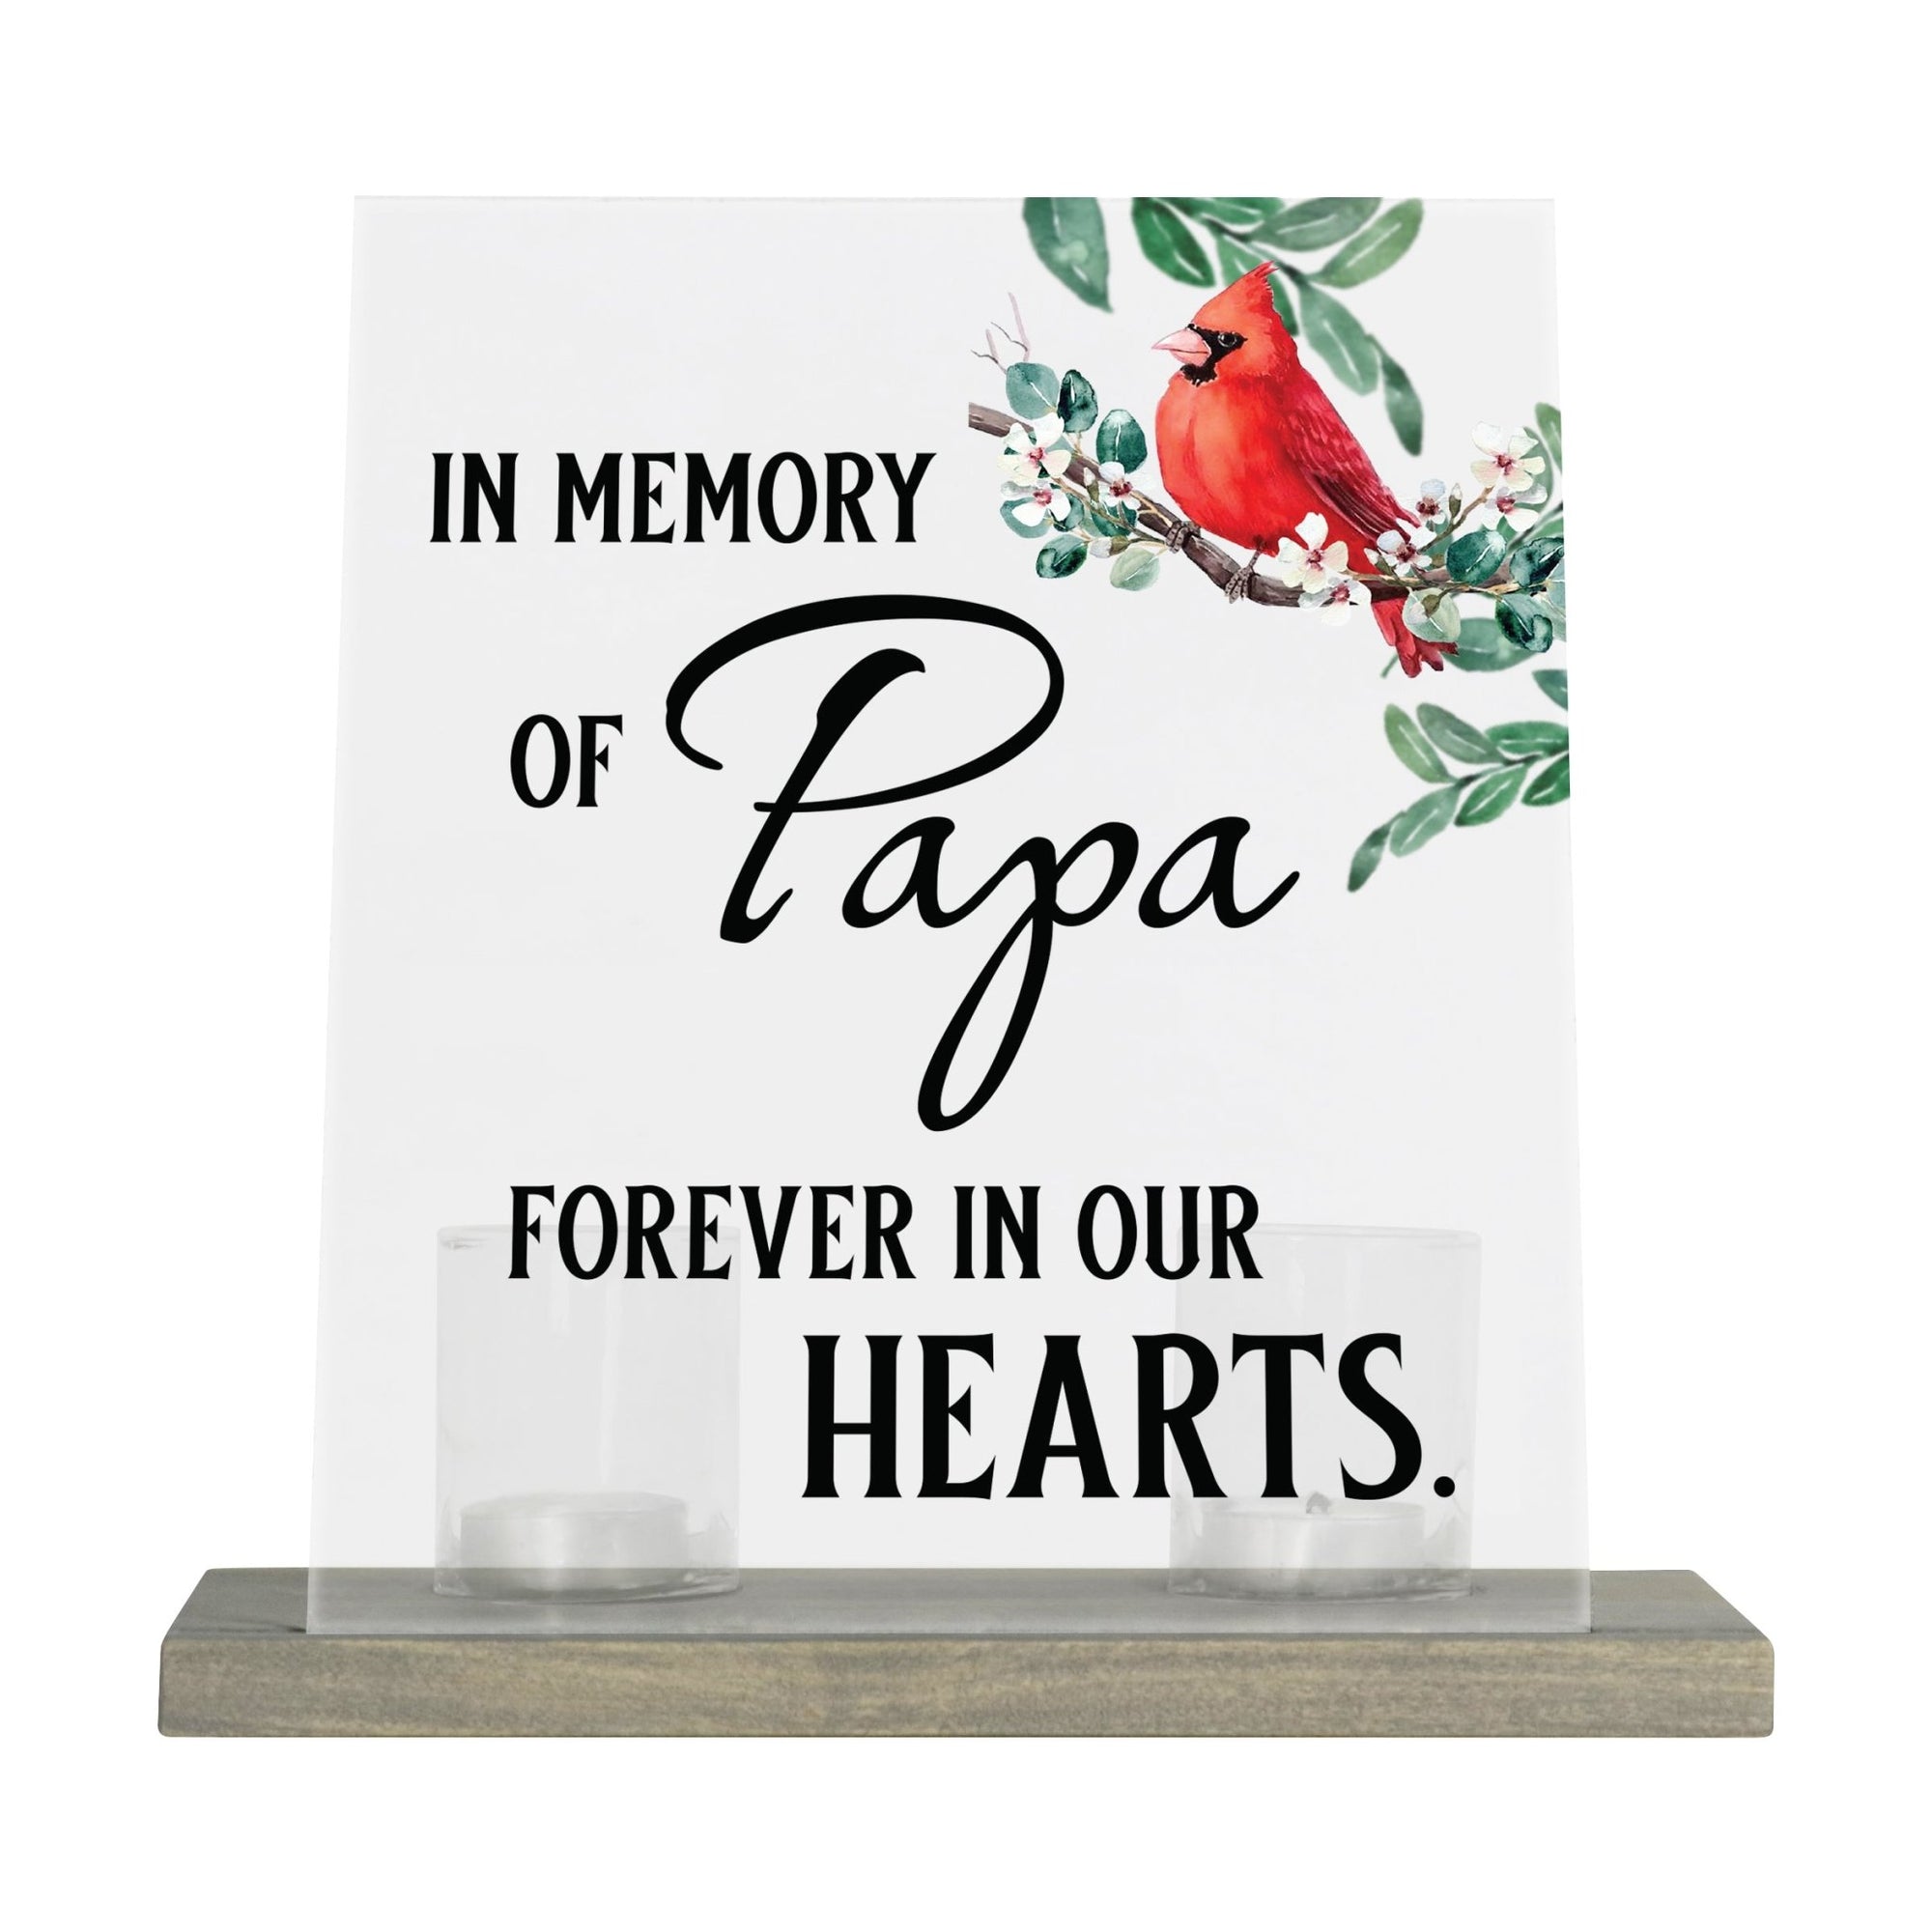 Vintage Memorial Cardinal Acrylic Sign Candle Holder With Wood Base And Glass Votives For Home Décor | In Memory Of Papa - LifeSong Milestones